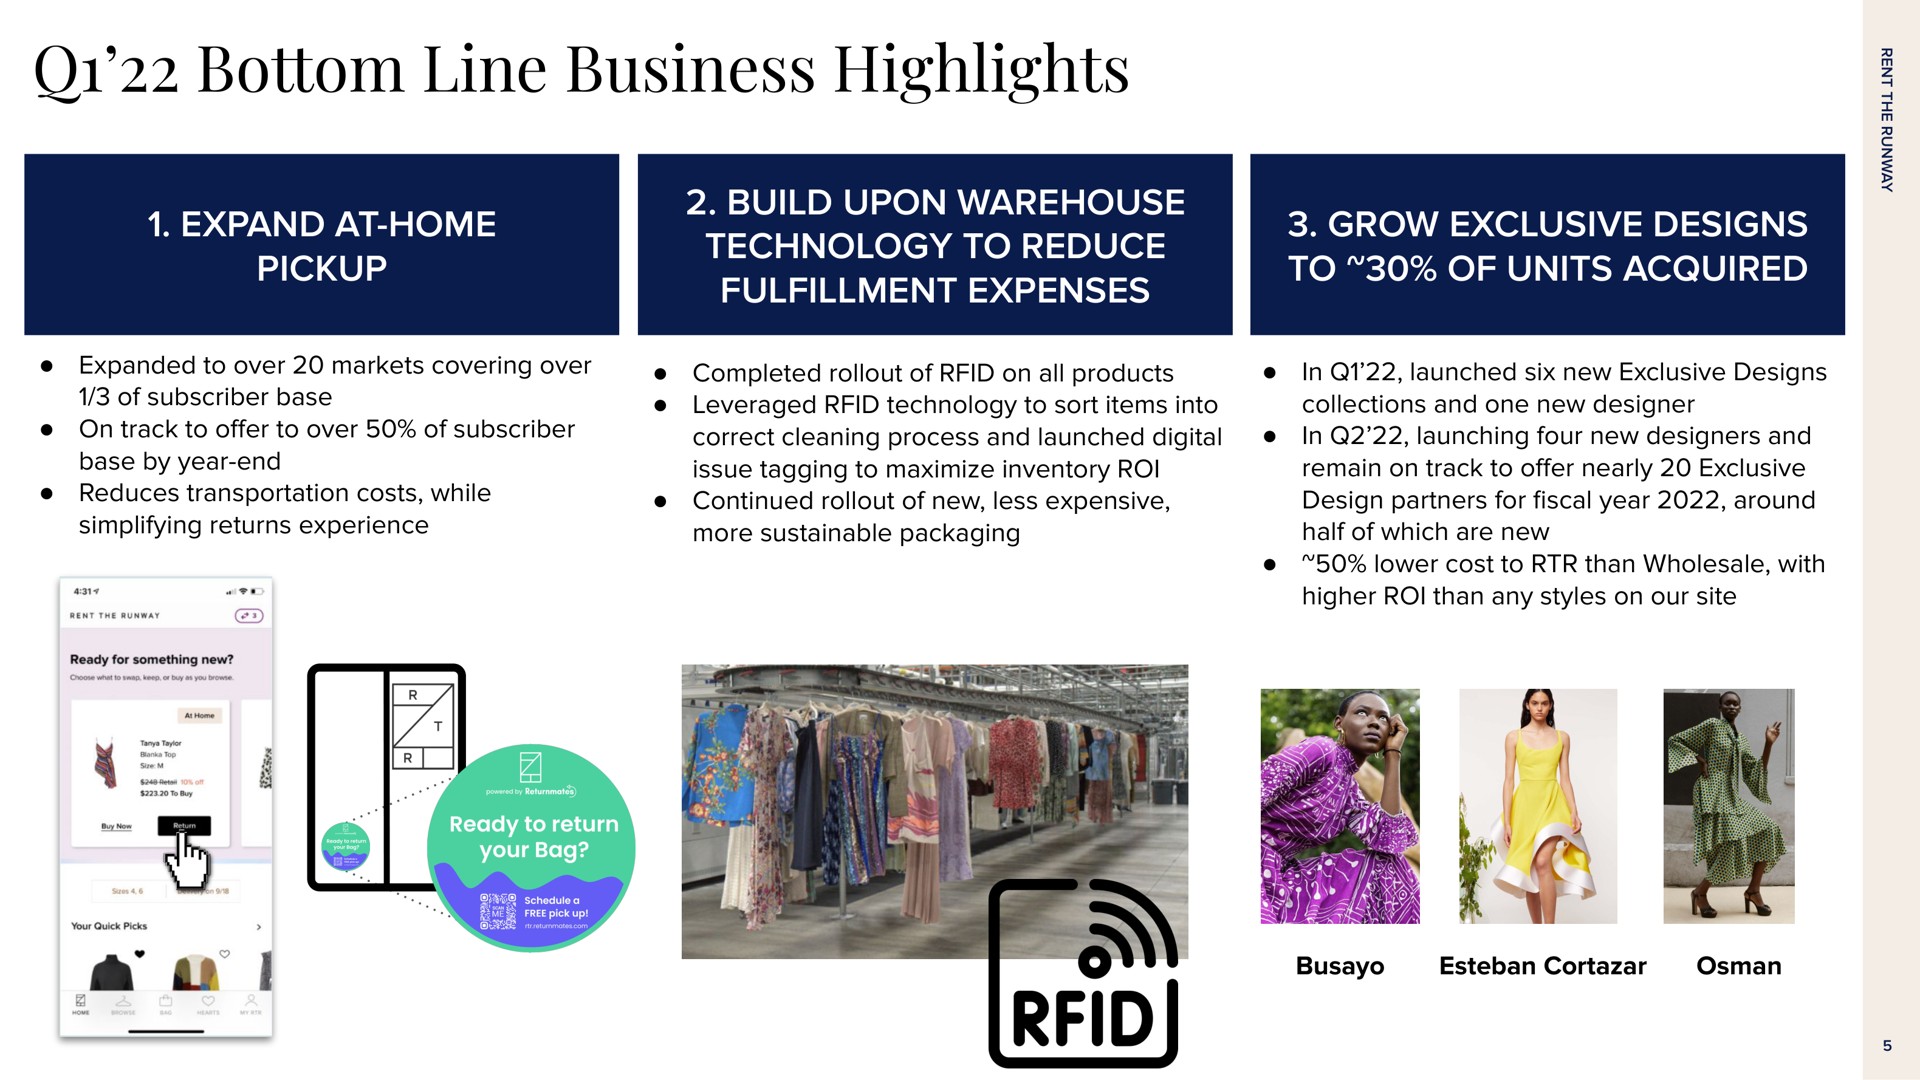 bottom line business highlights expand at home pickup build upon warehouse technology to reduce fulfillment expenses grow exclusive designs to of units acquired | Rent The Runway